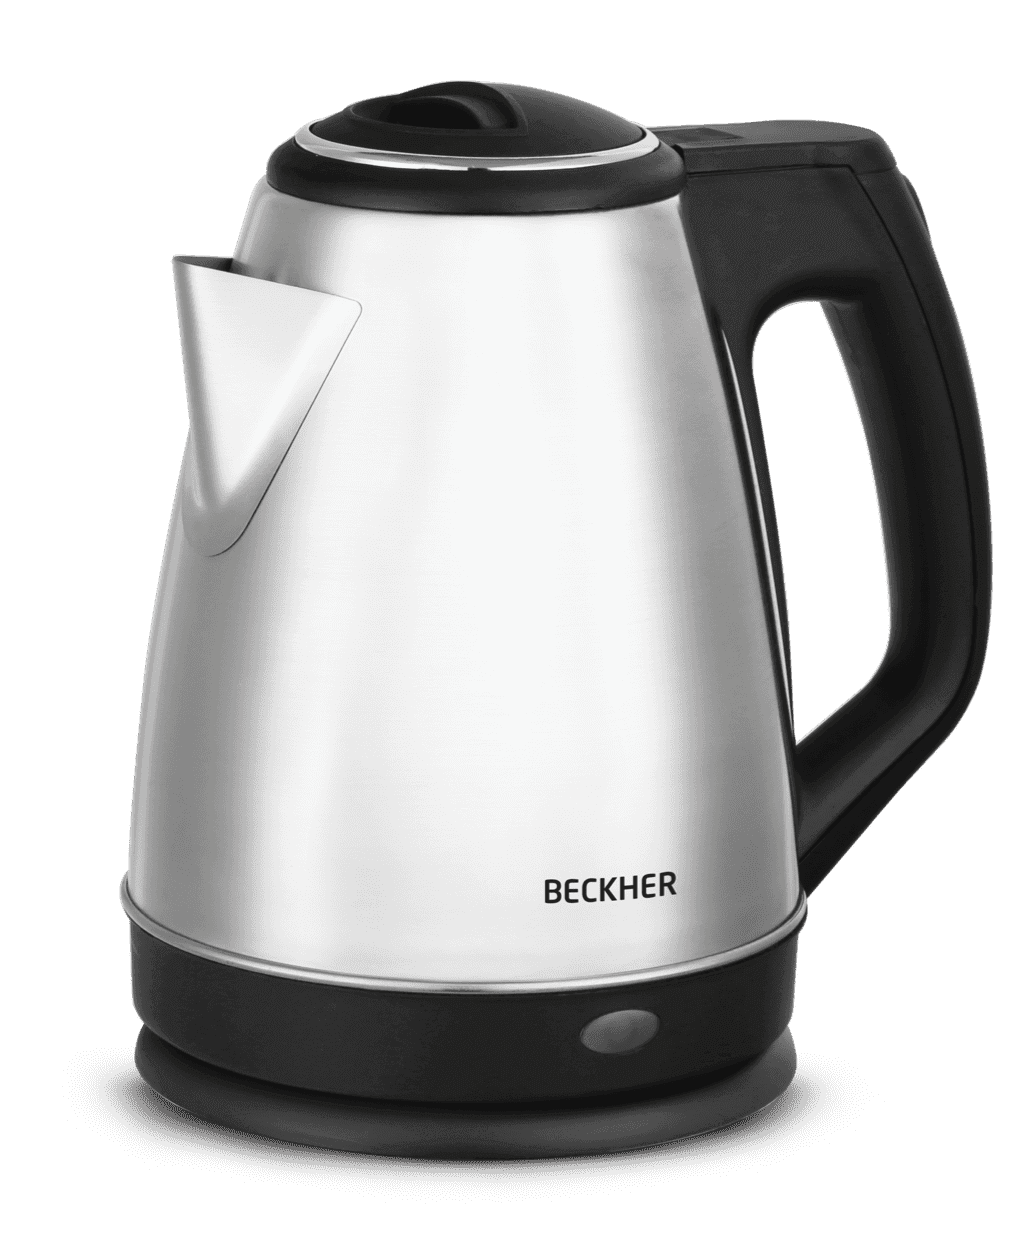 Kettle by Beckher, product number MI-KT 1901B